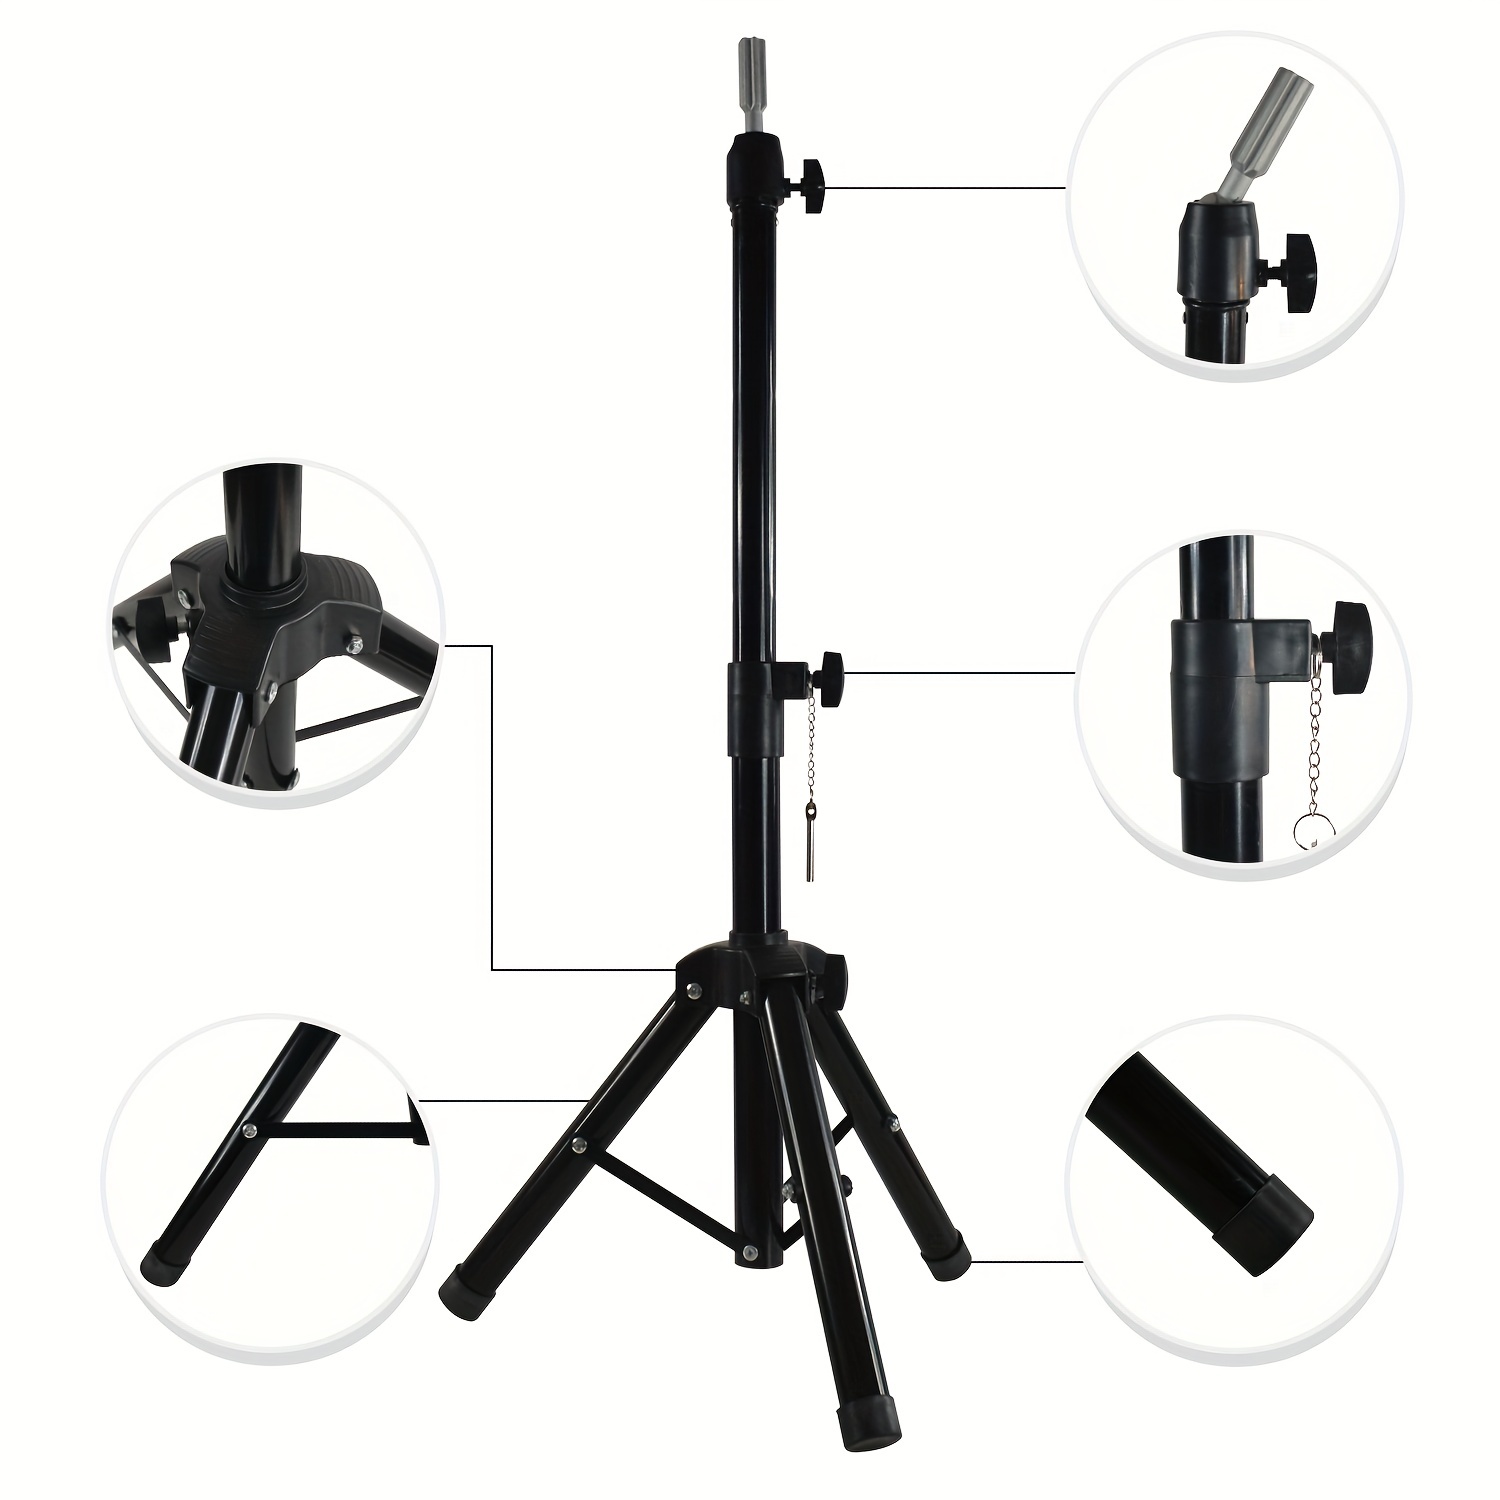 Wig Stand Tripod Mannequin Head Stand, Adjustable Heavy Duty Wig